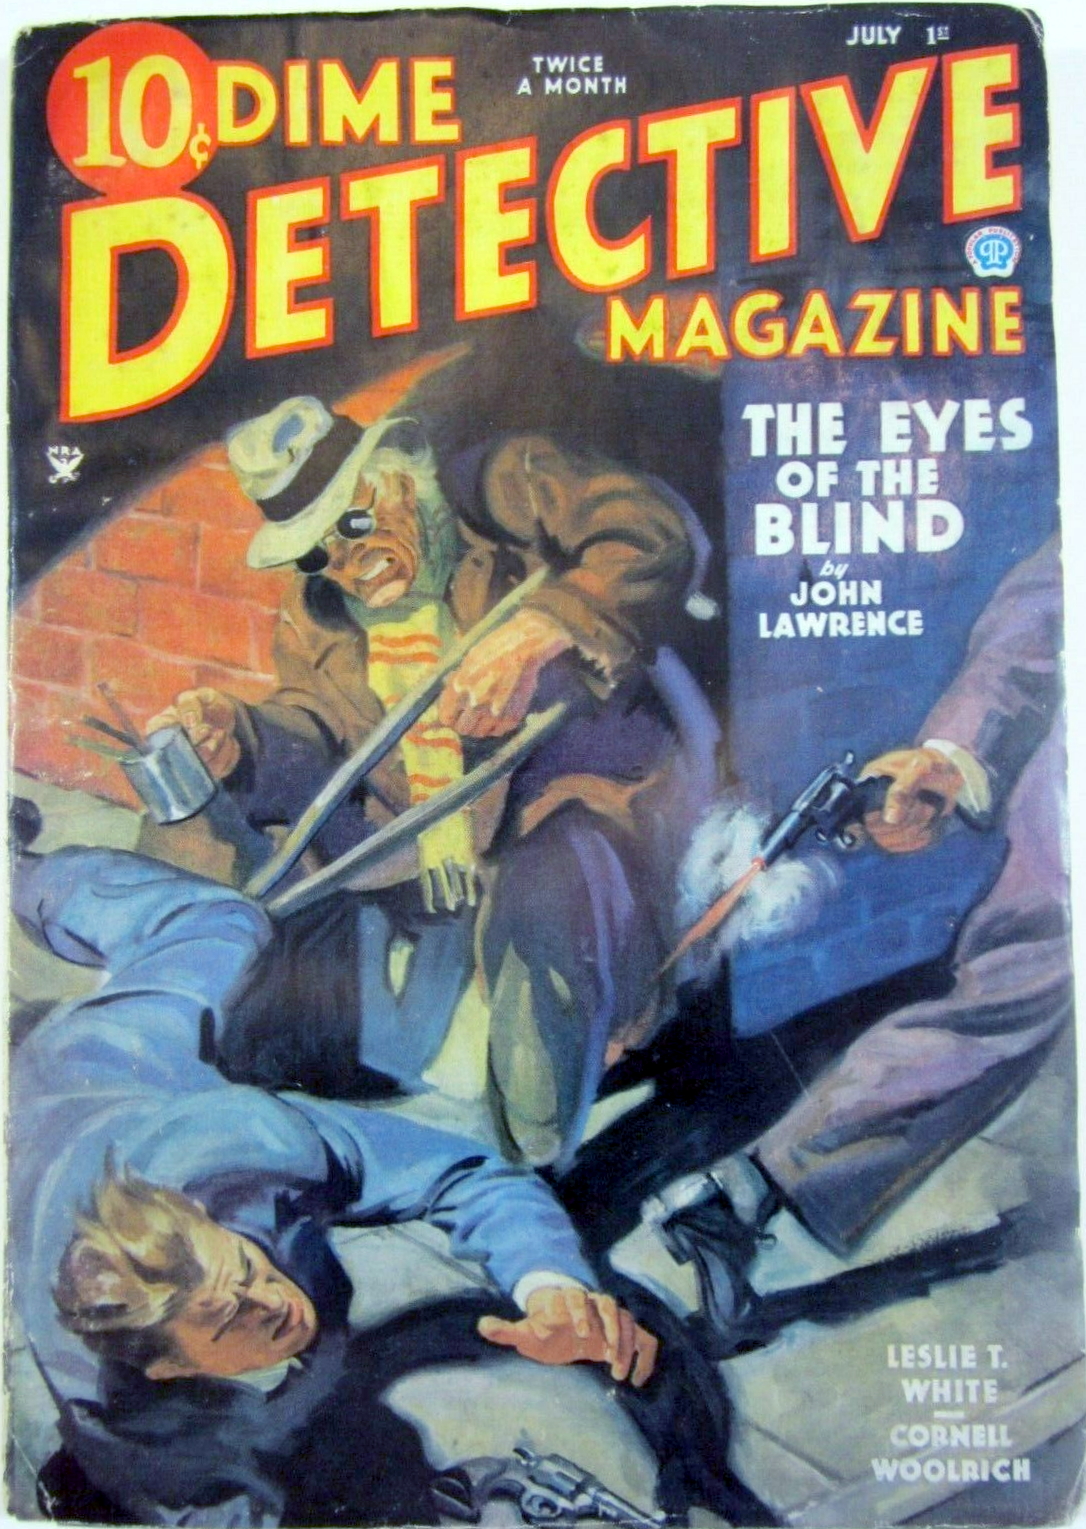 Dime Detective - July 1 1935